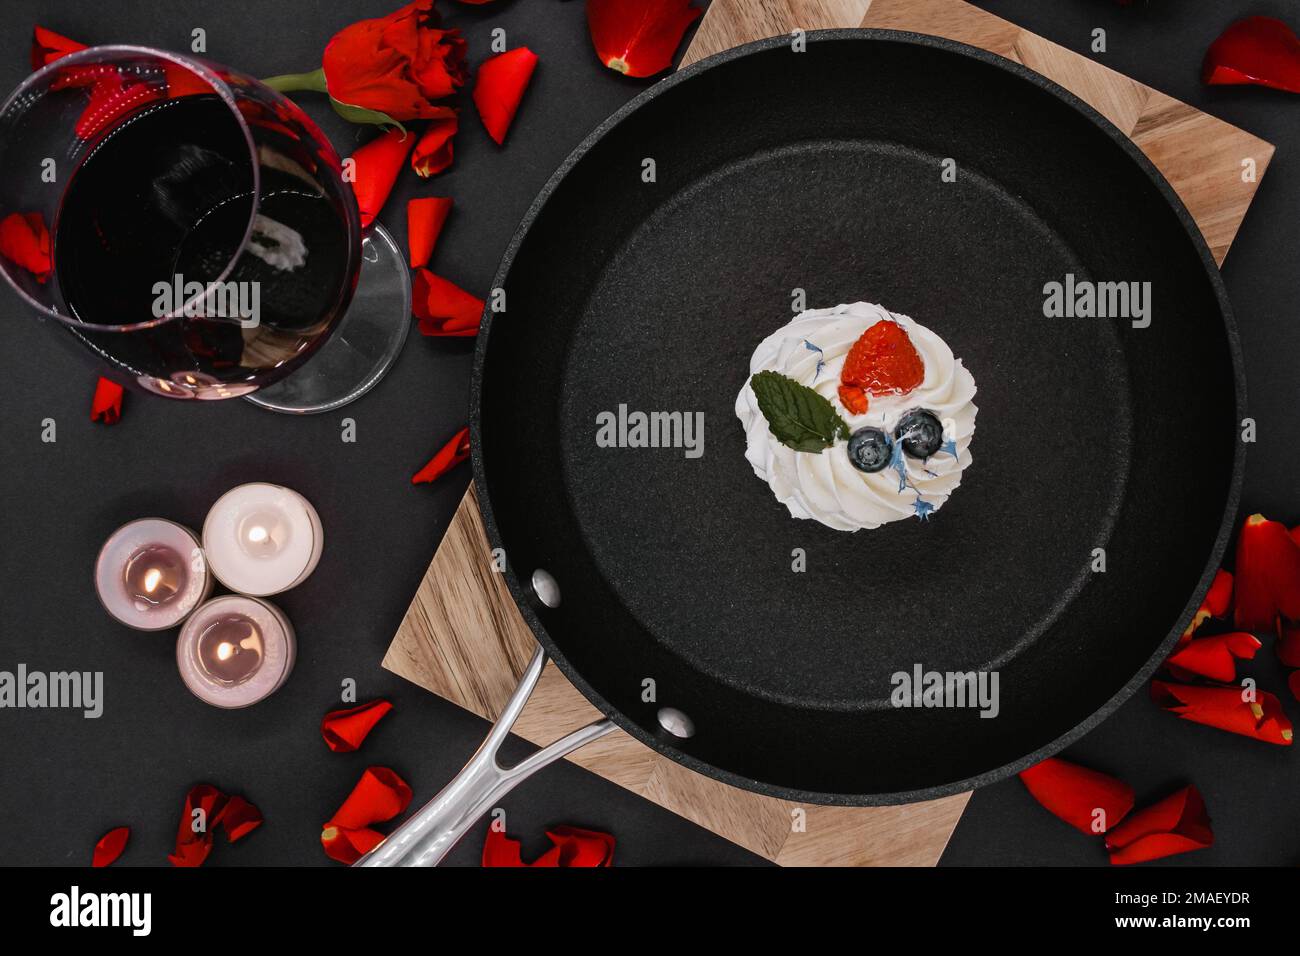 black frying pan with a pavlova cake on a wooden board with a black background, next to which is a glass of red wine and lit candles. flat lay Stock Photo